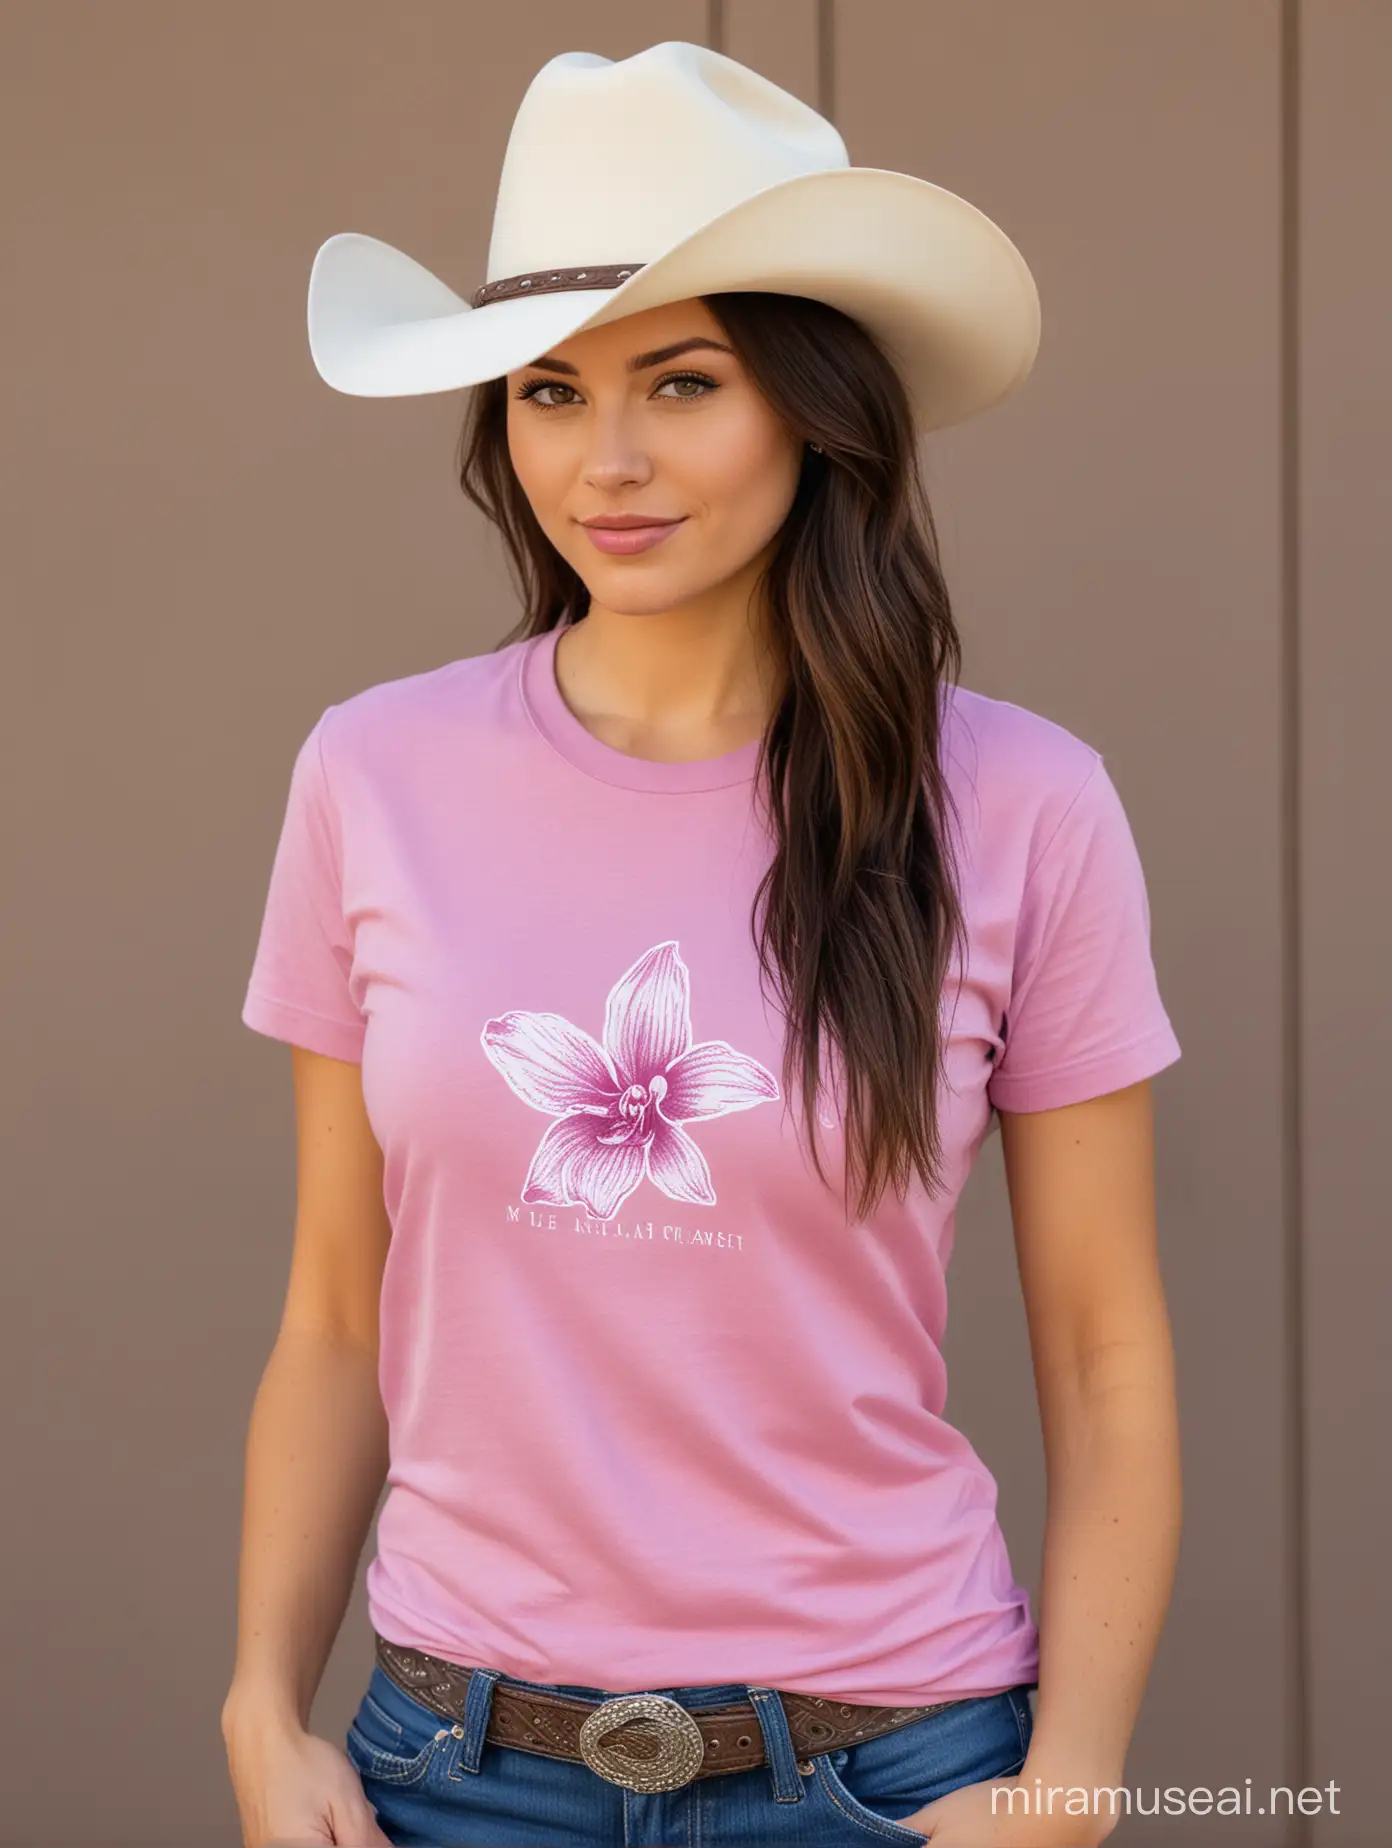 Cowgirl Model in Bella Canvas Orchid Tee and Cowboy Hat